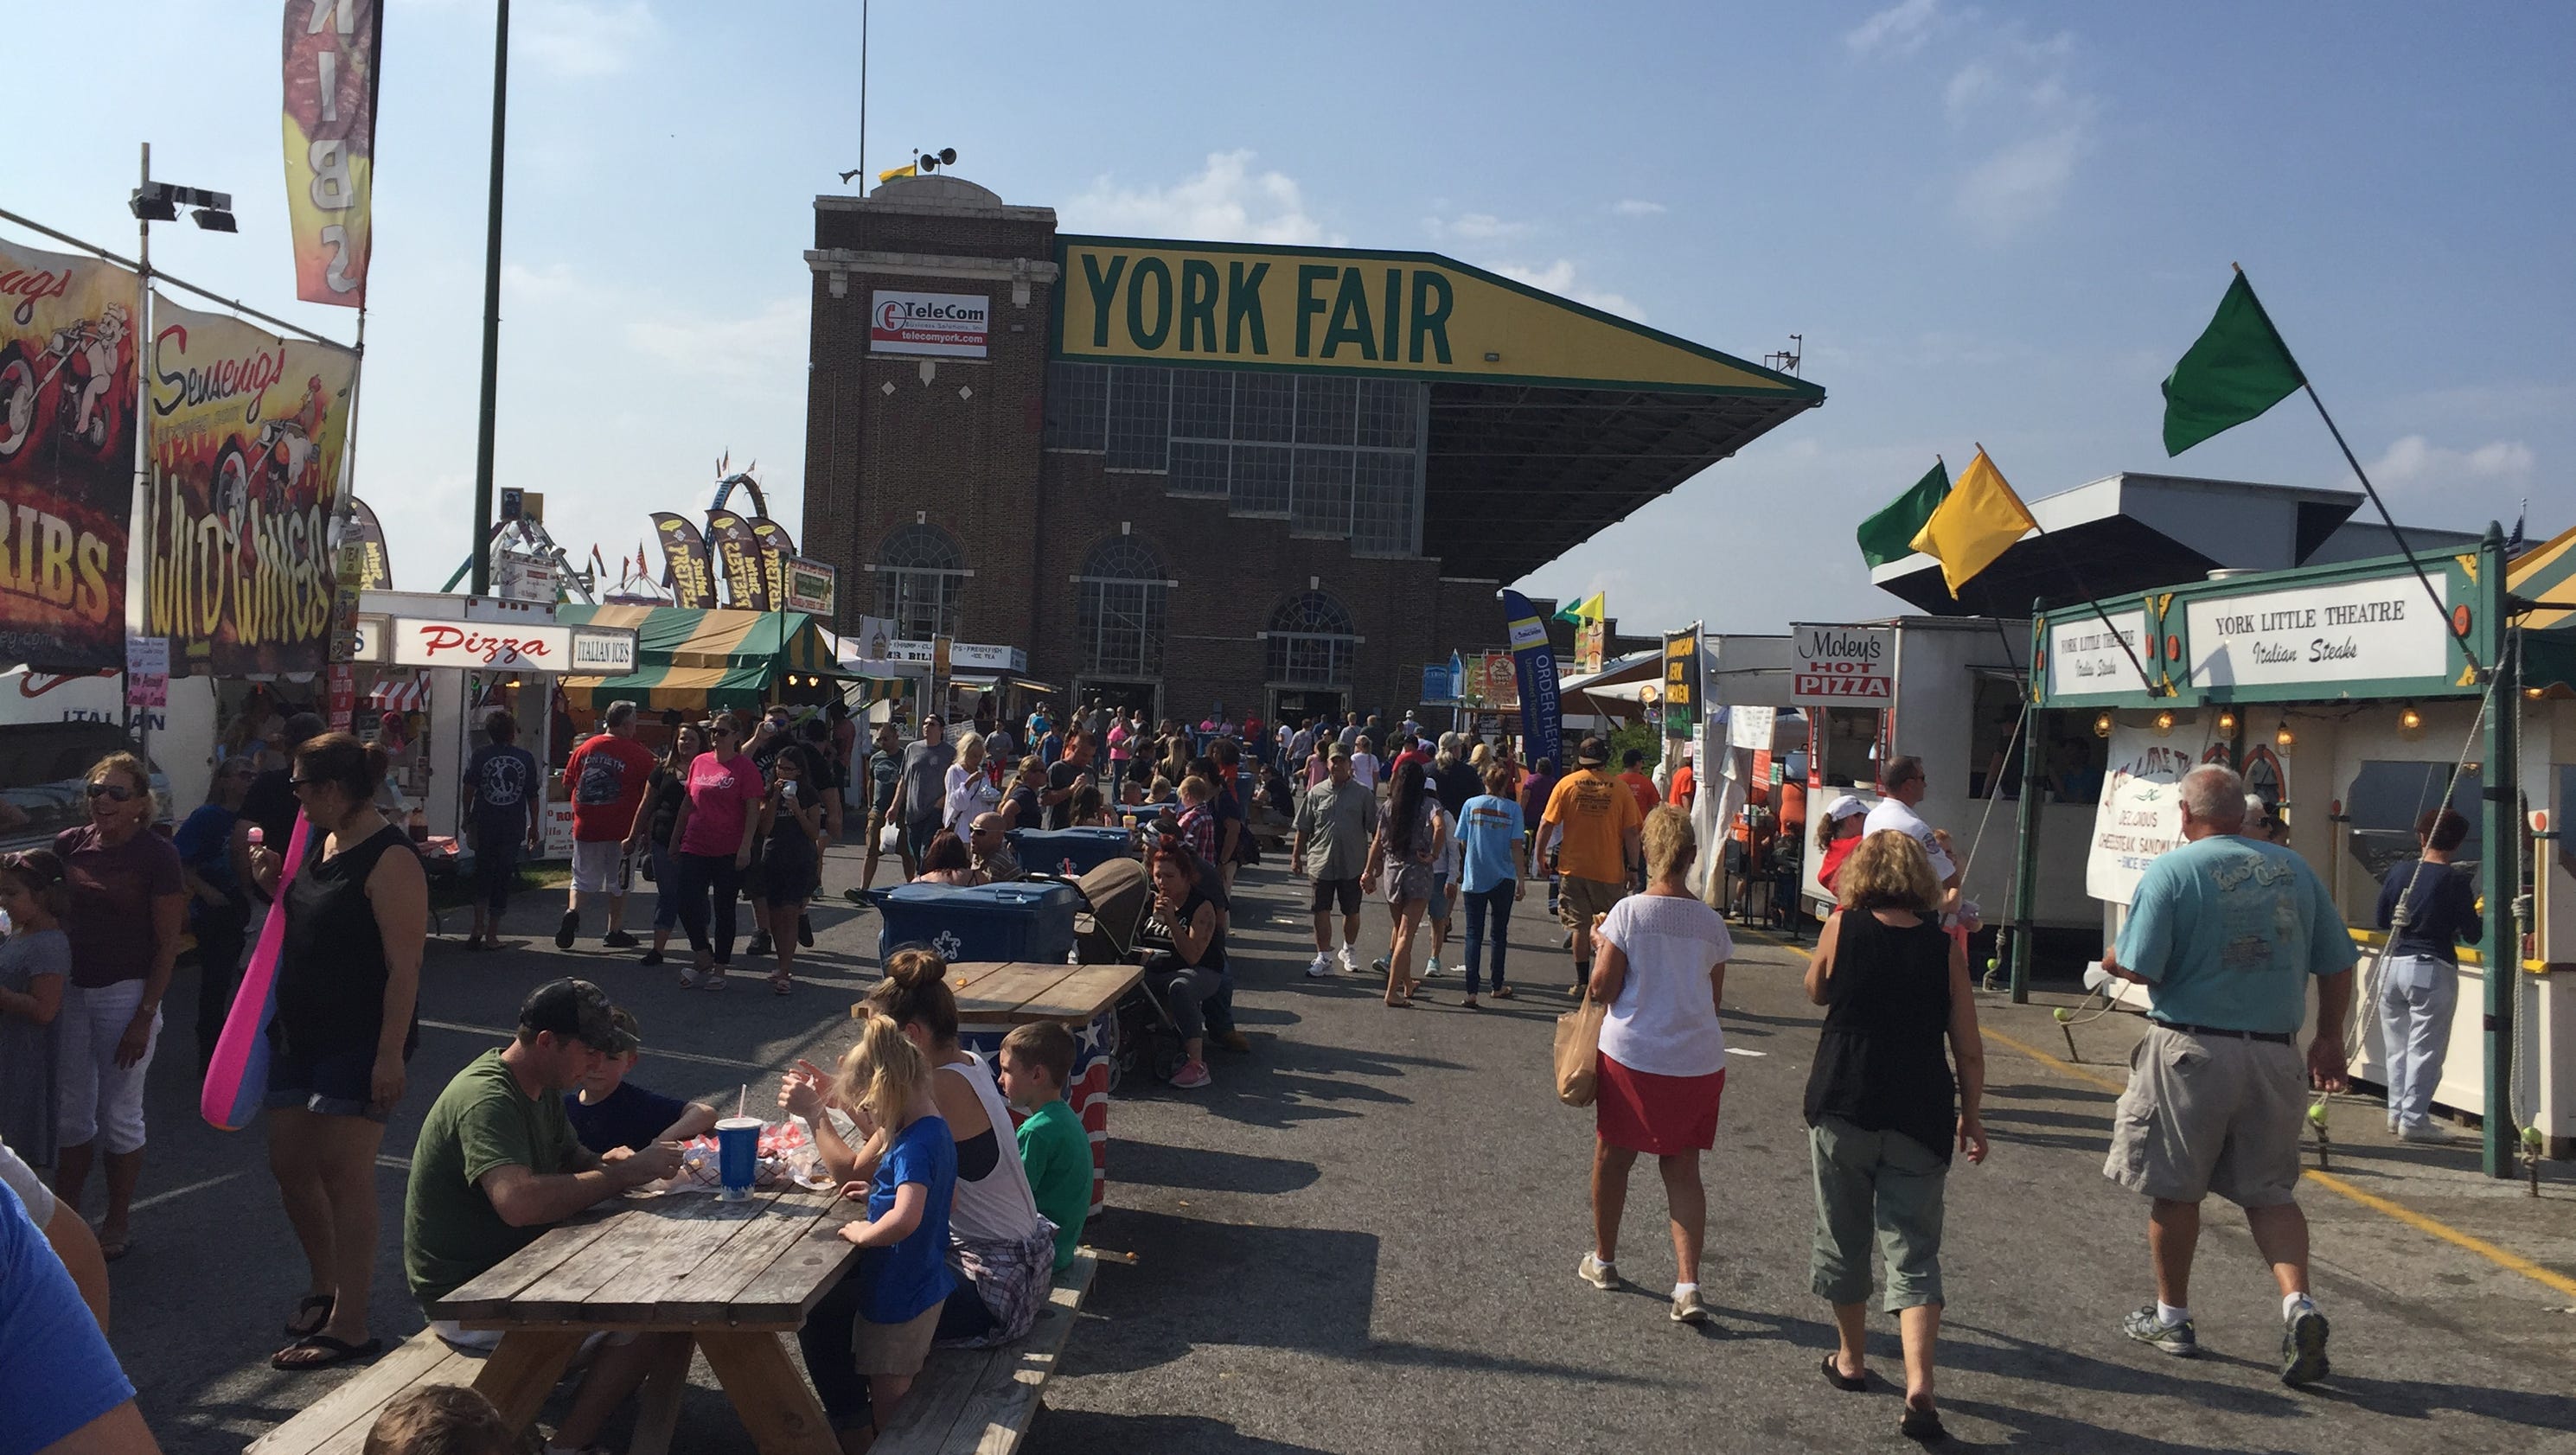 York Fair could move to July or August as Expo Center explores changes